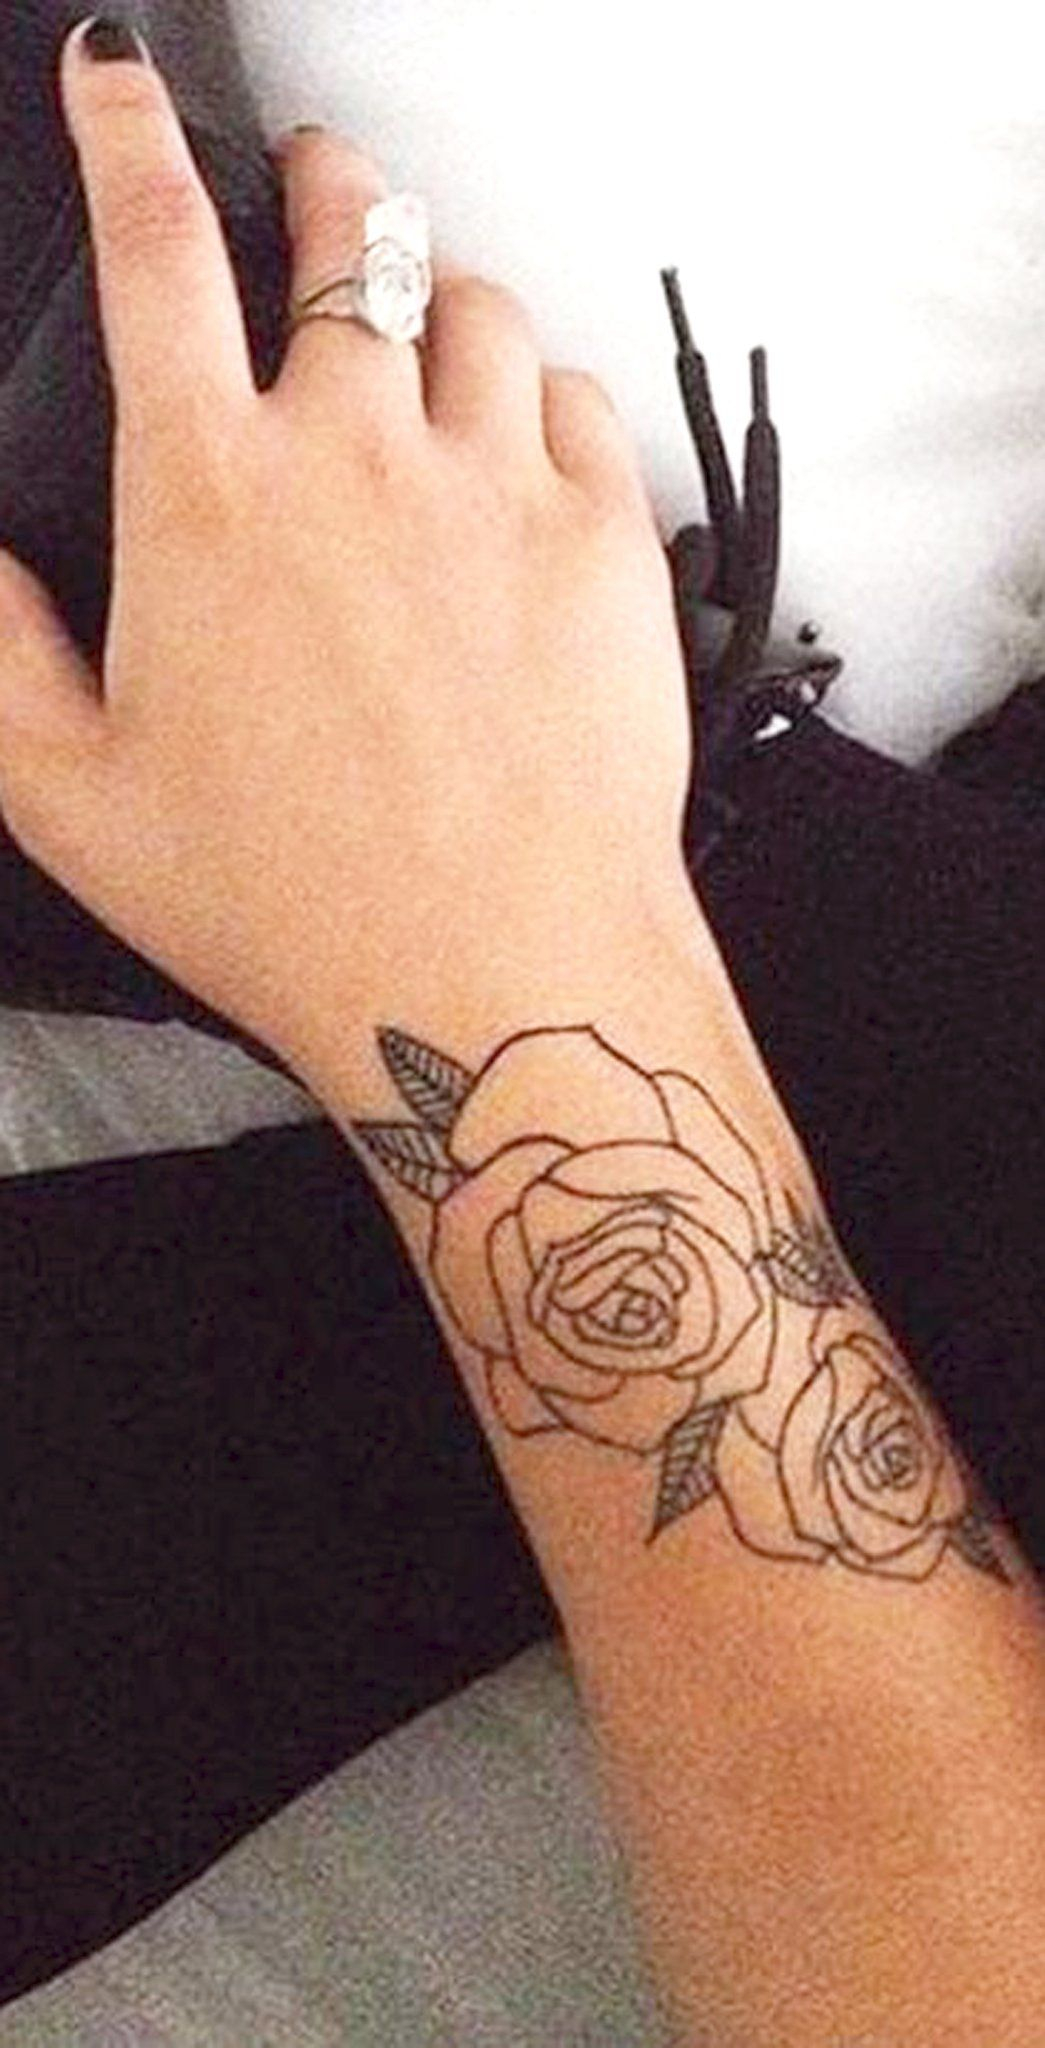 Realistic Minimal Rose Outer Forearm Tattoo Ideas For Women intended for size 1045 X 2048